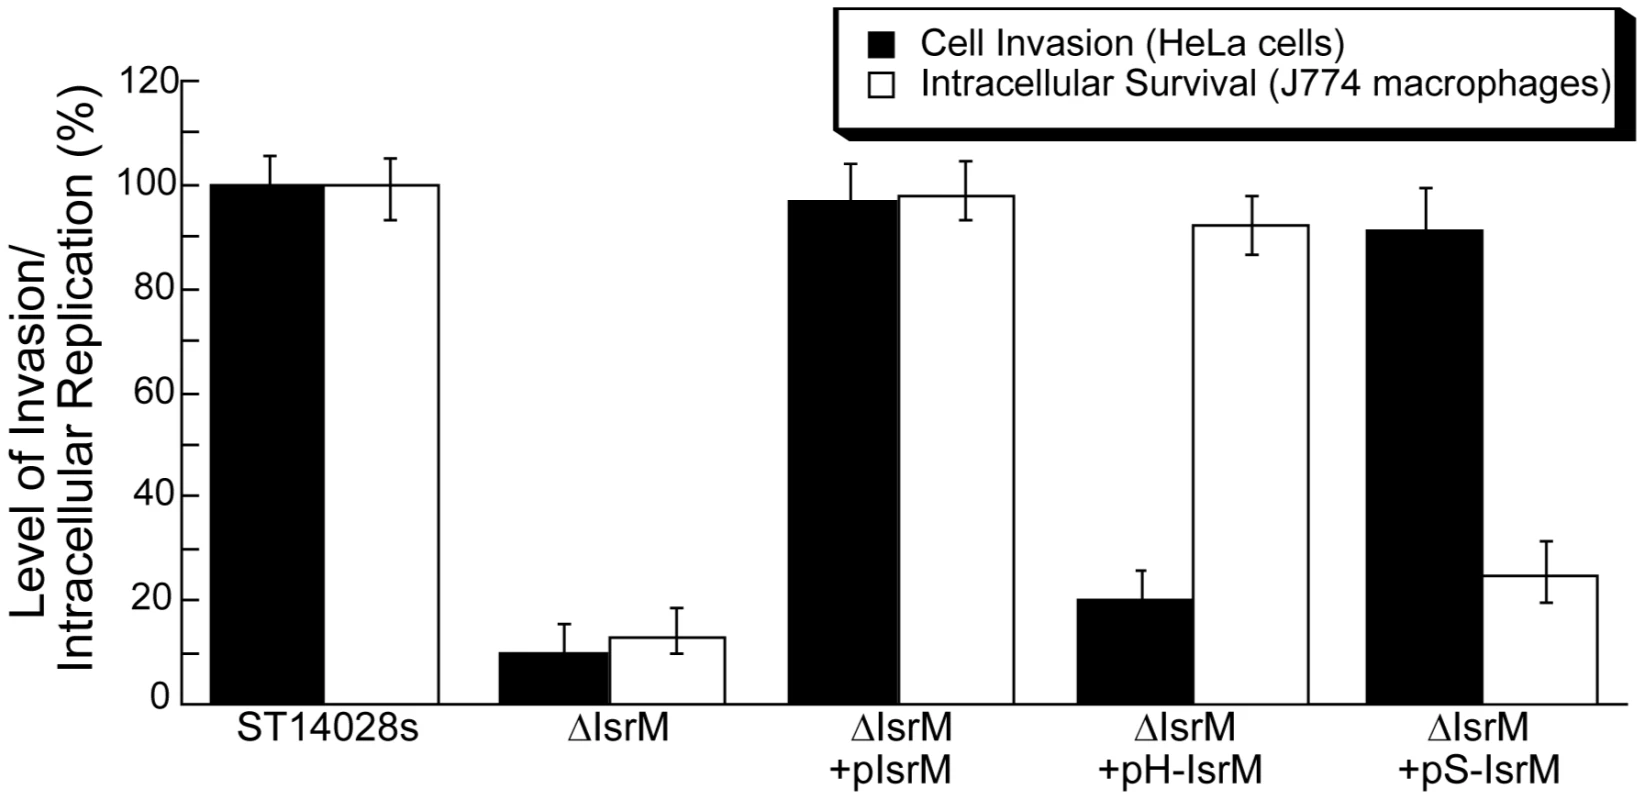 Epithelial cell invasion and intracellular replication in macrophages.